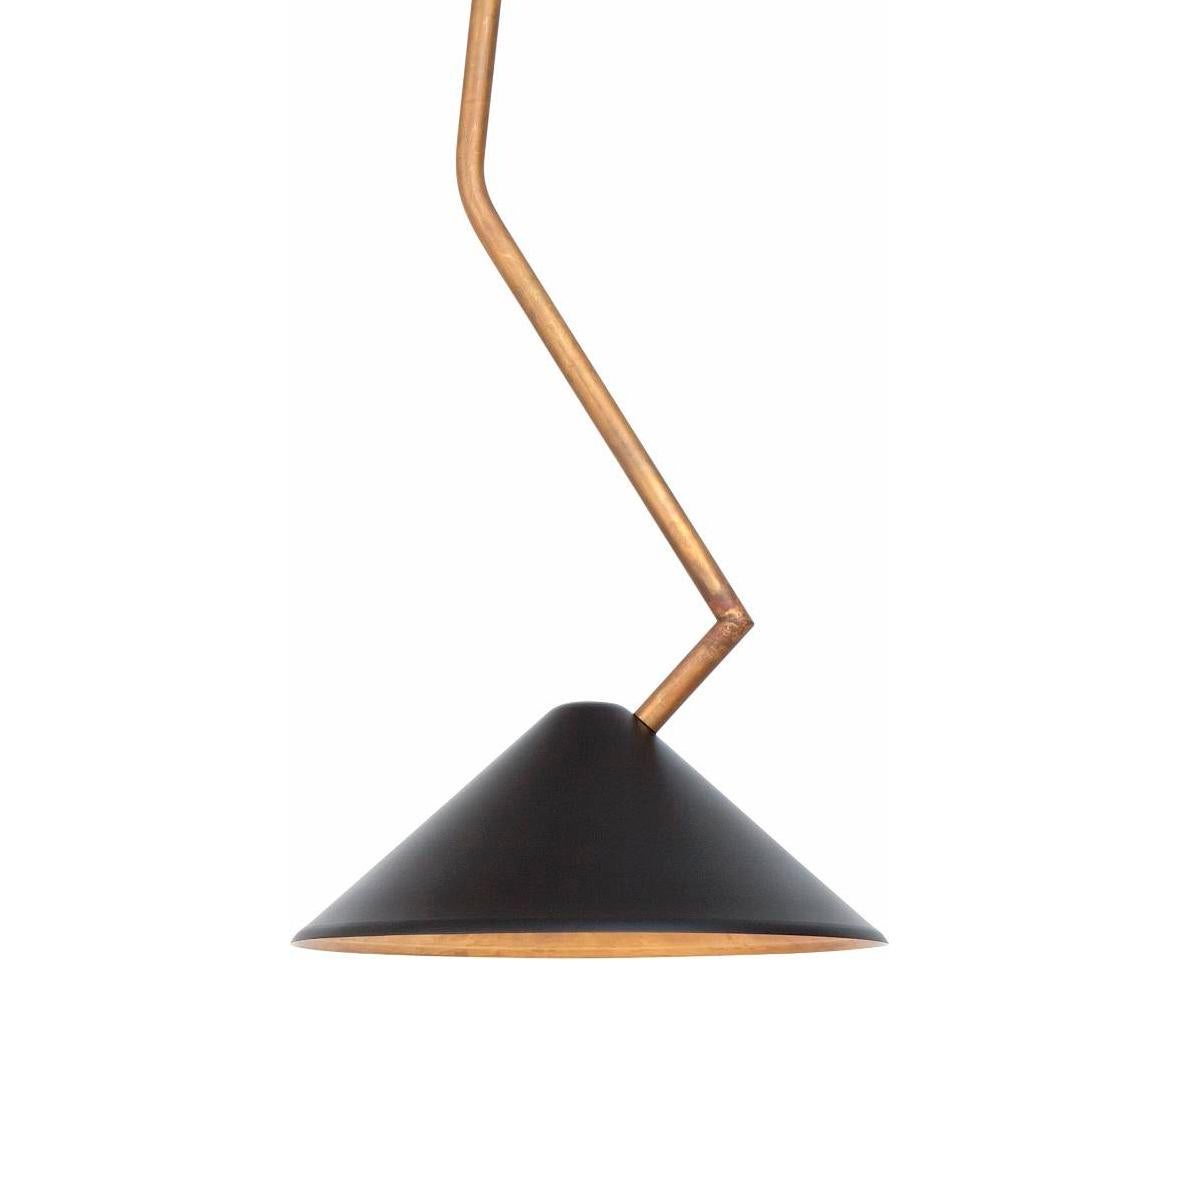 Ceiling lamp designed by Johan Carpner manufactured by Konsthantverk Tyringe in Sweden.

Grenverk ceiling
Measures: D 300 mm
H 750 mm
LED 5 W dimmable
Ceiling cup, hook mounted
3427-7 raw brass/black (one)

The lamps are wiring with